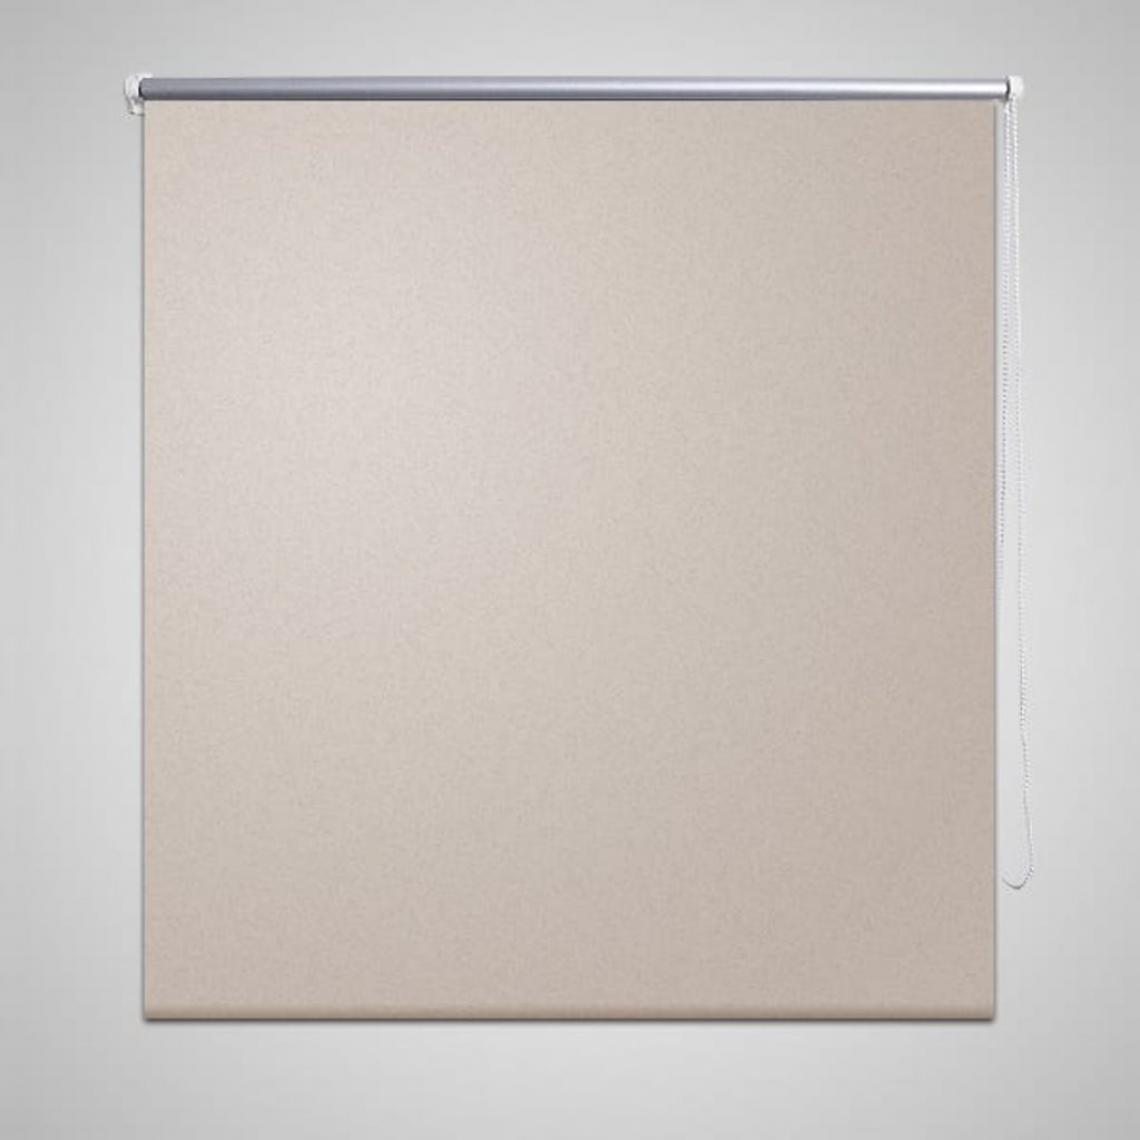 Chunhelife - Store enrouleur occultant 120 x 175 cm beige - Store banne